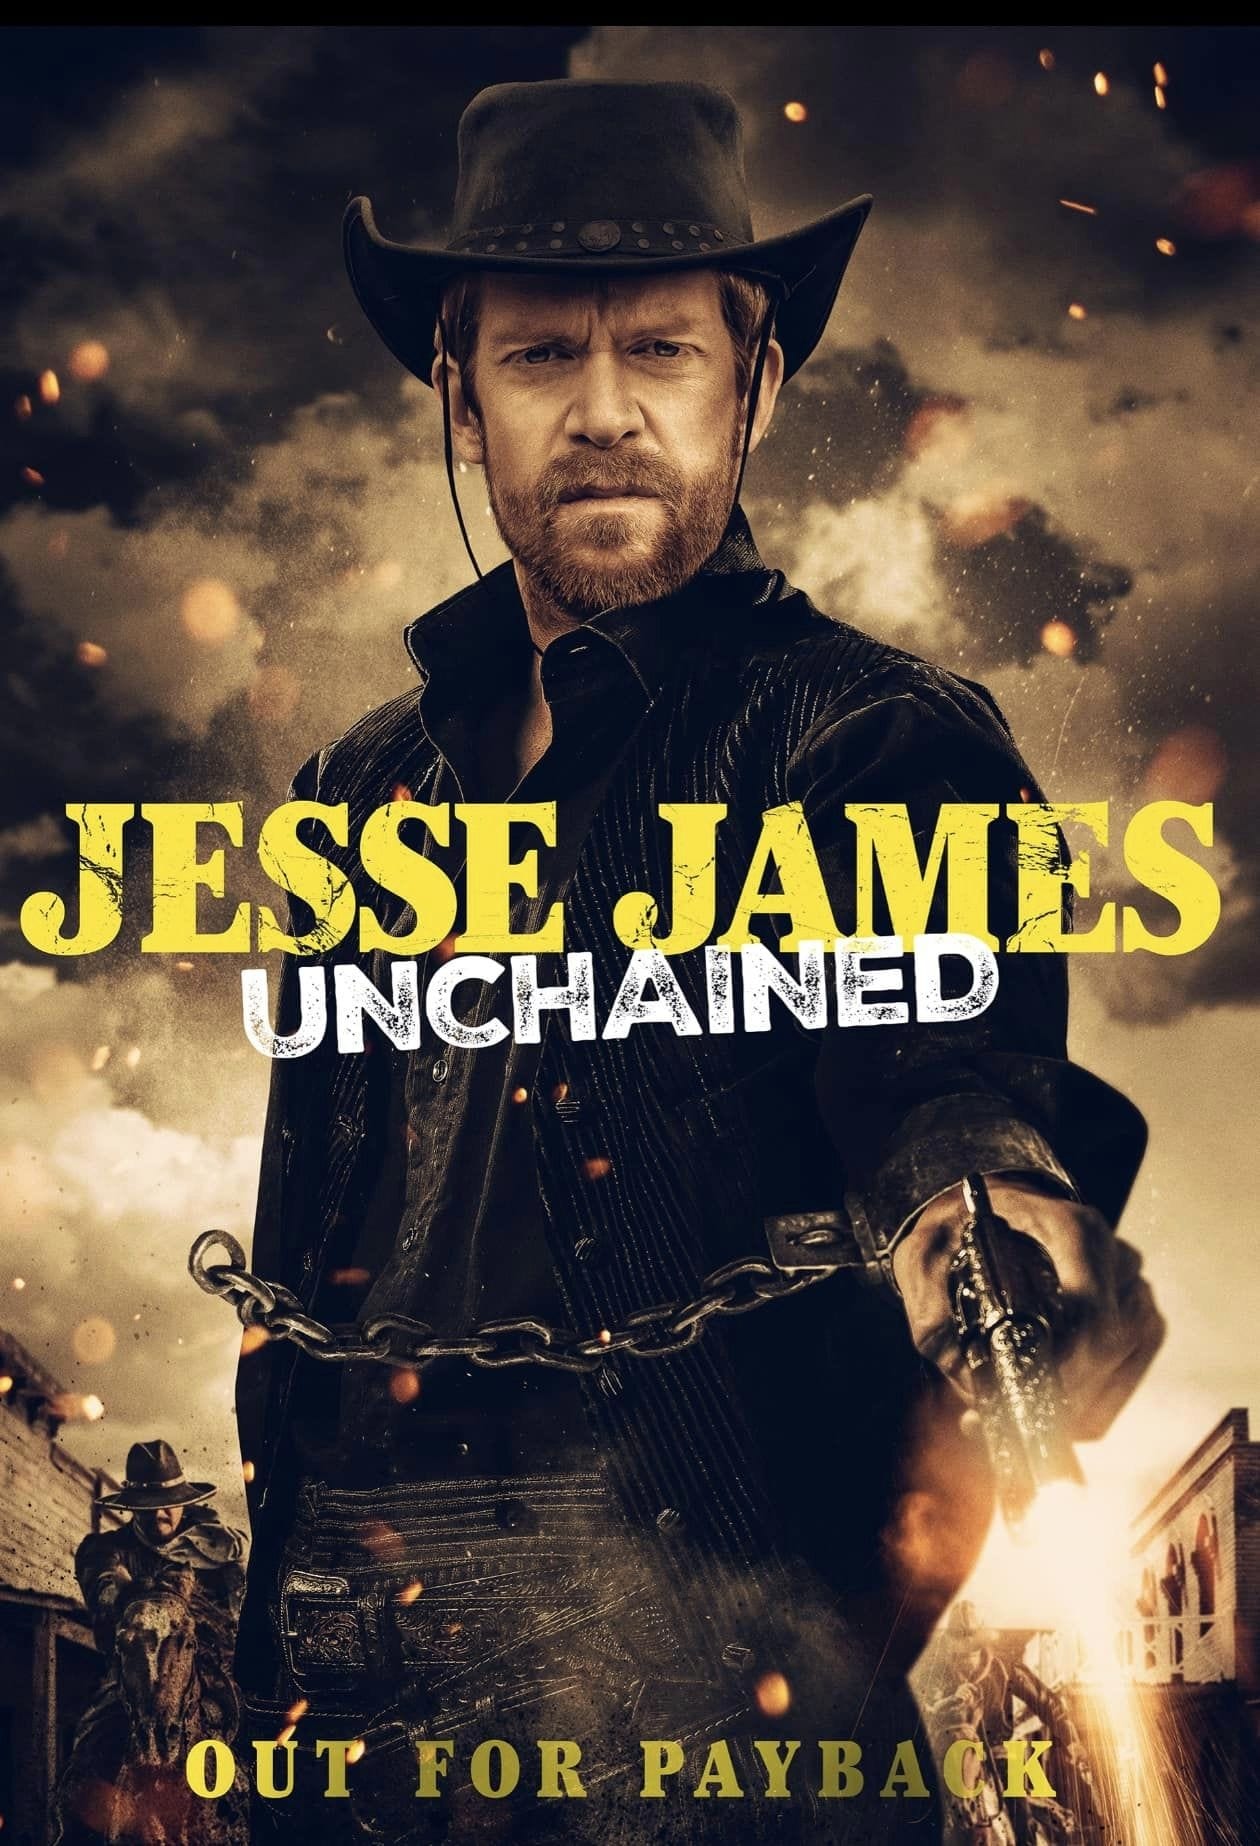 Jesse James Unchained (2022) poster - Allmovieland.com